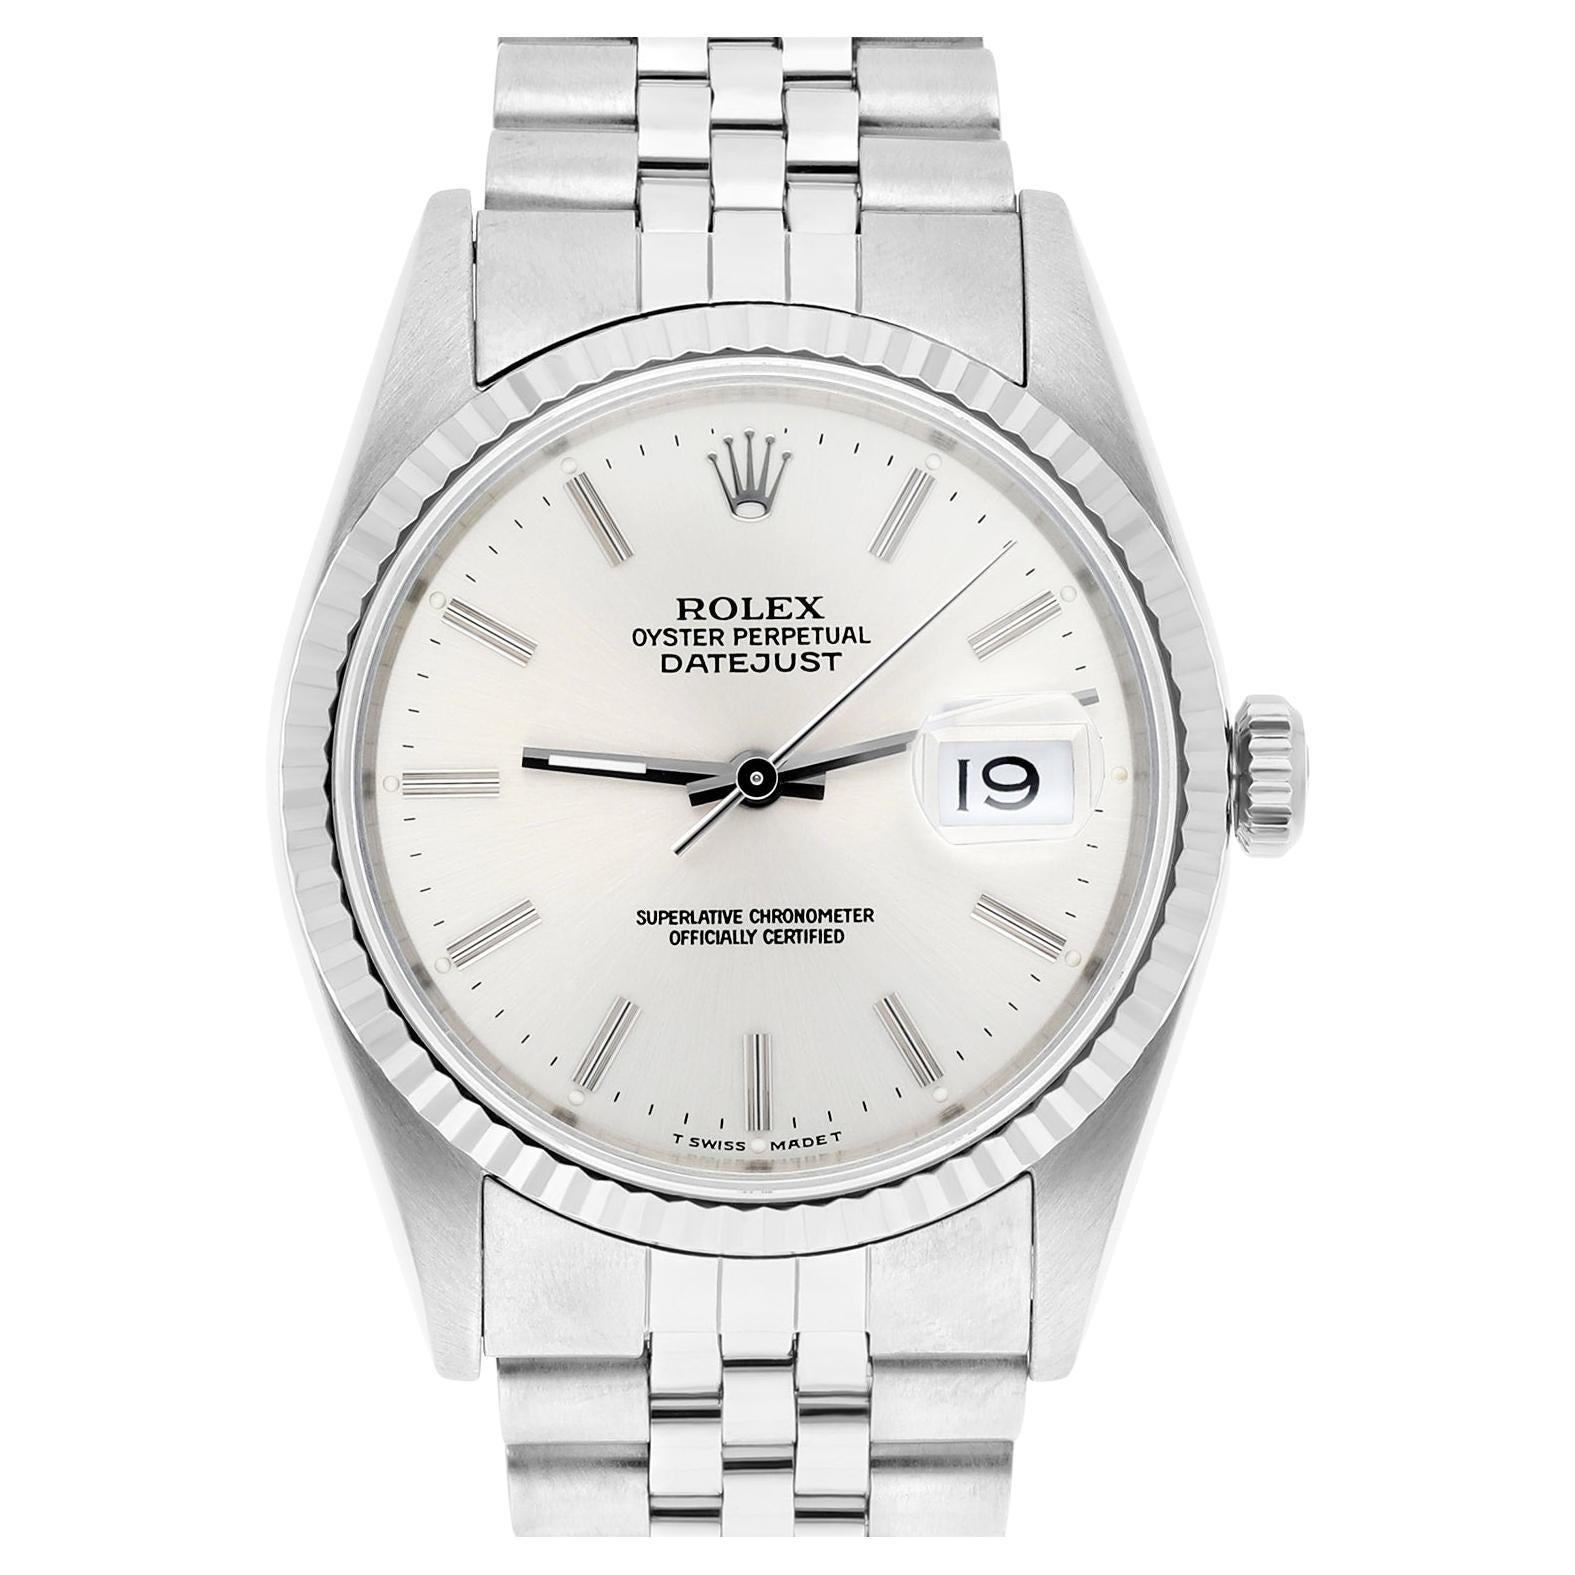 Rolex Datejust 36mm Stainless Steel 16234 Silver Dial, Jubilee Circa 1991